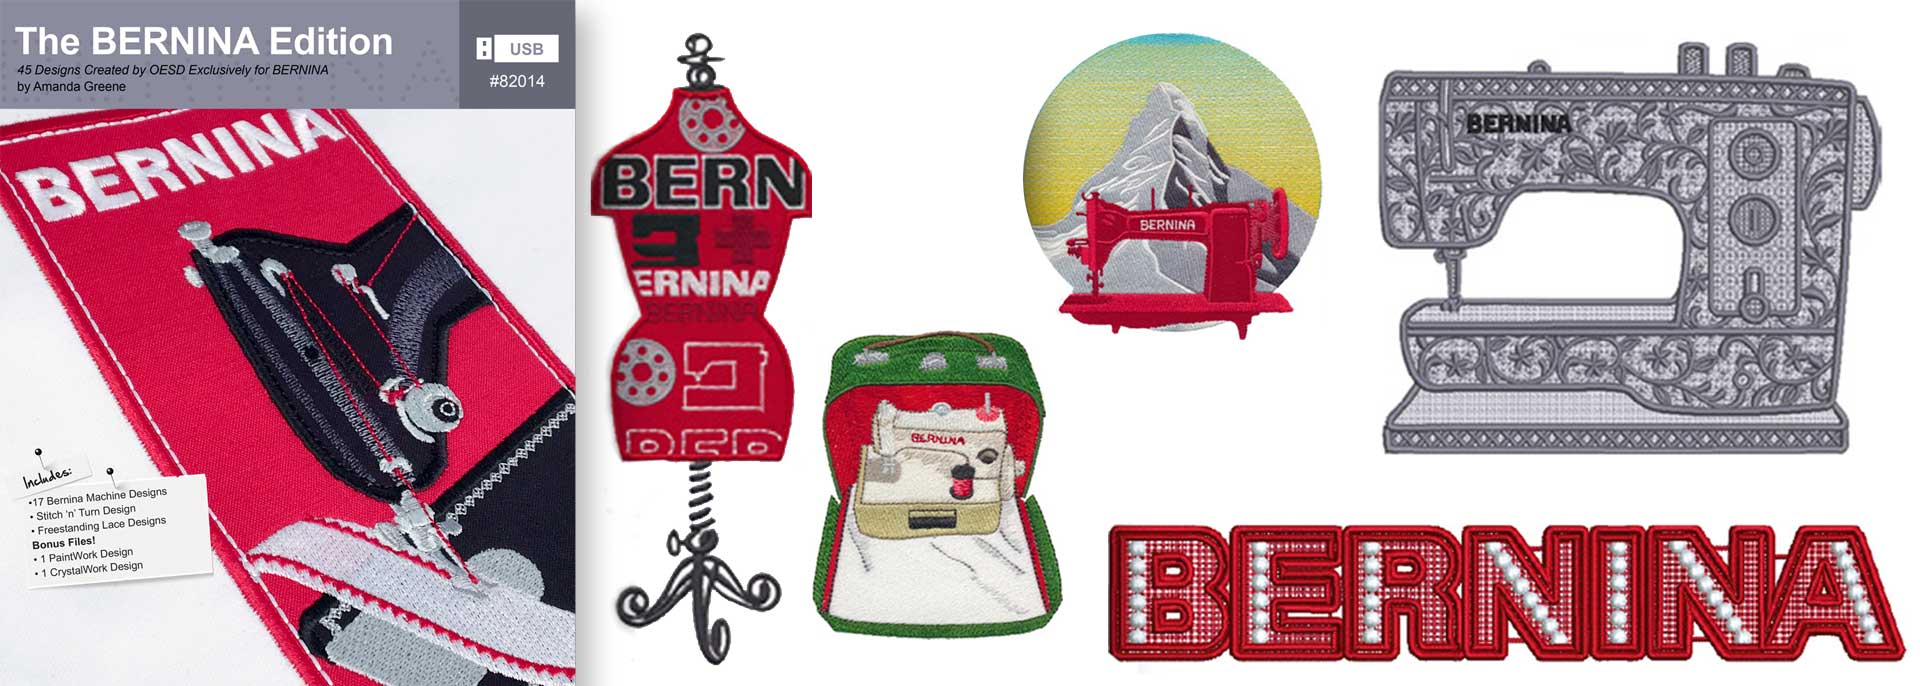 Bernina Embroidery Patterns Bernina Exclusive Embroidery Collections Software Bernina